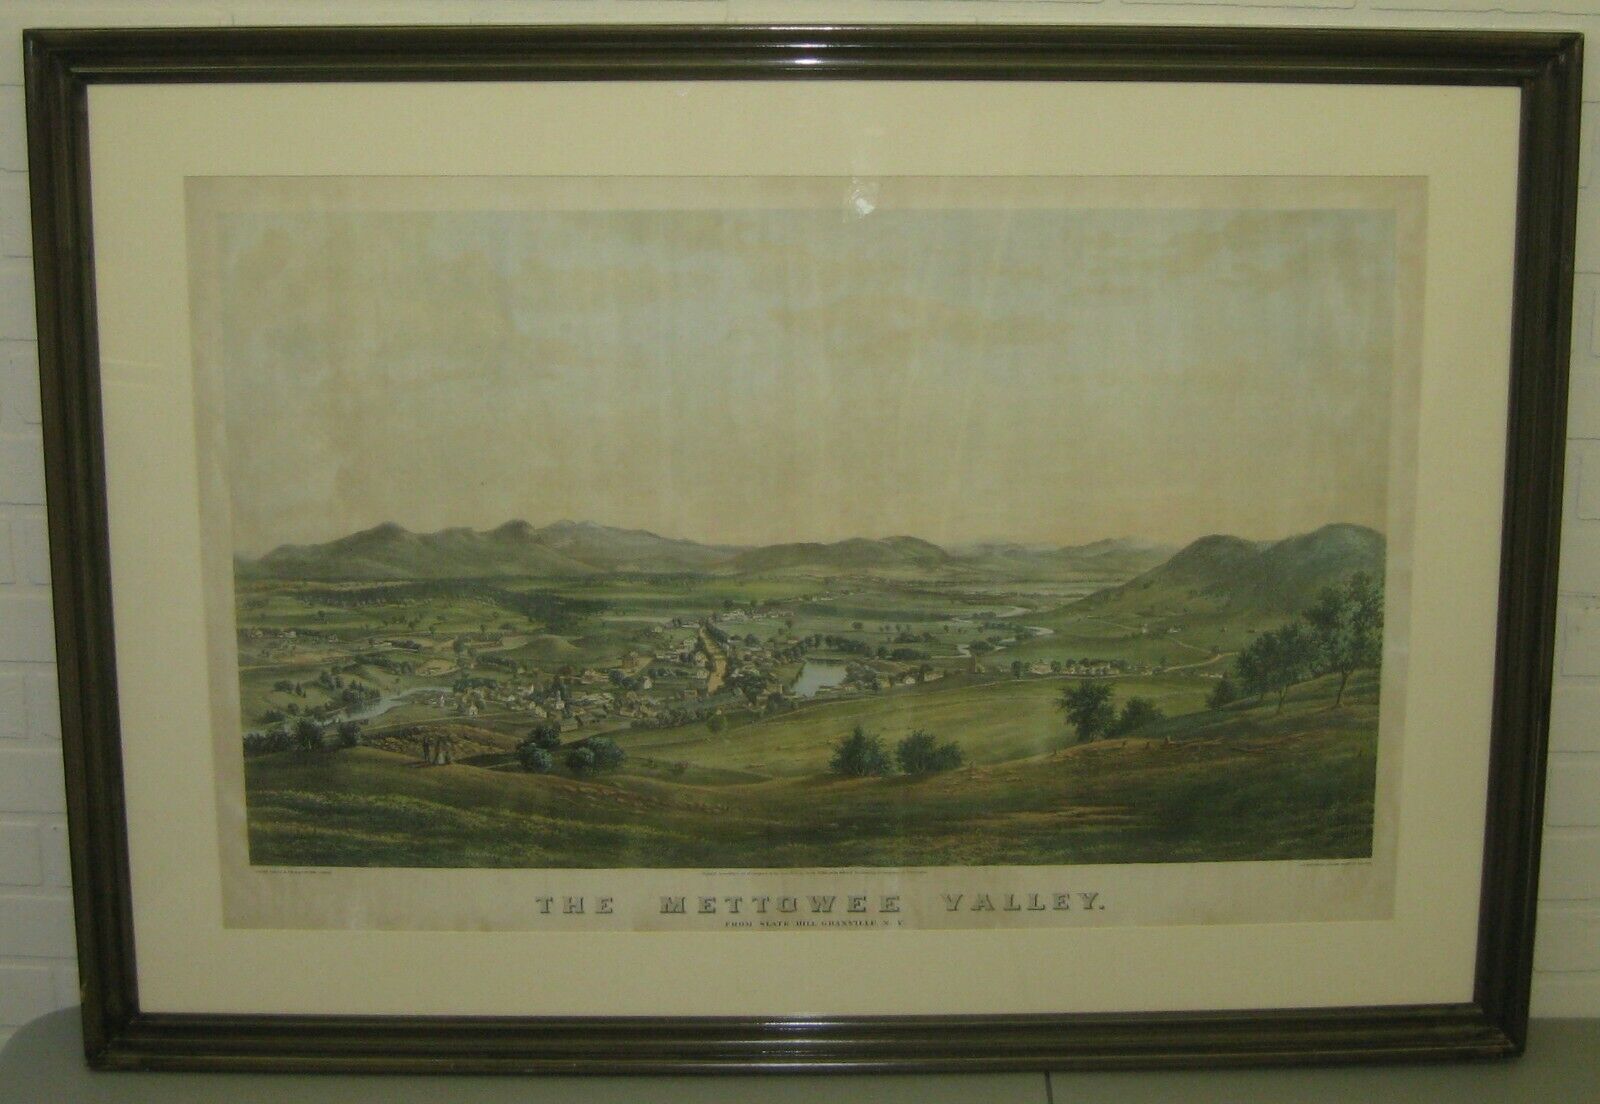 Antique METTOWEE VALLEY GRANVILLE NEW YORK Birds Eye View JH Bufford LITHOGRAPH